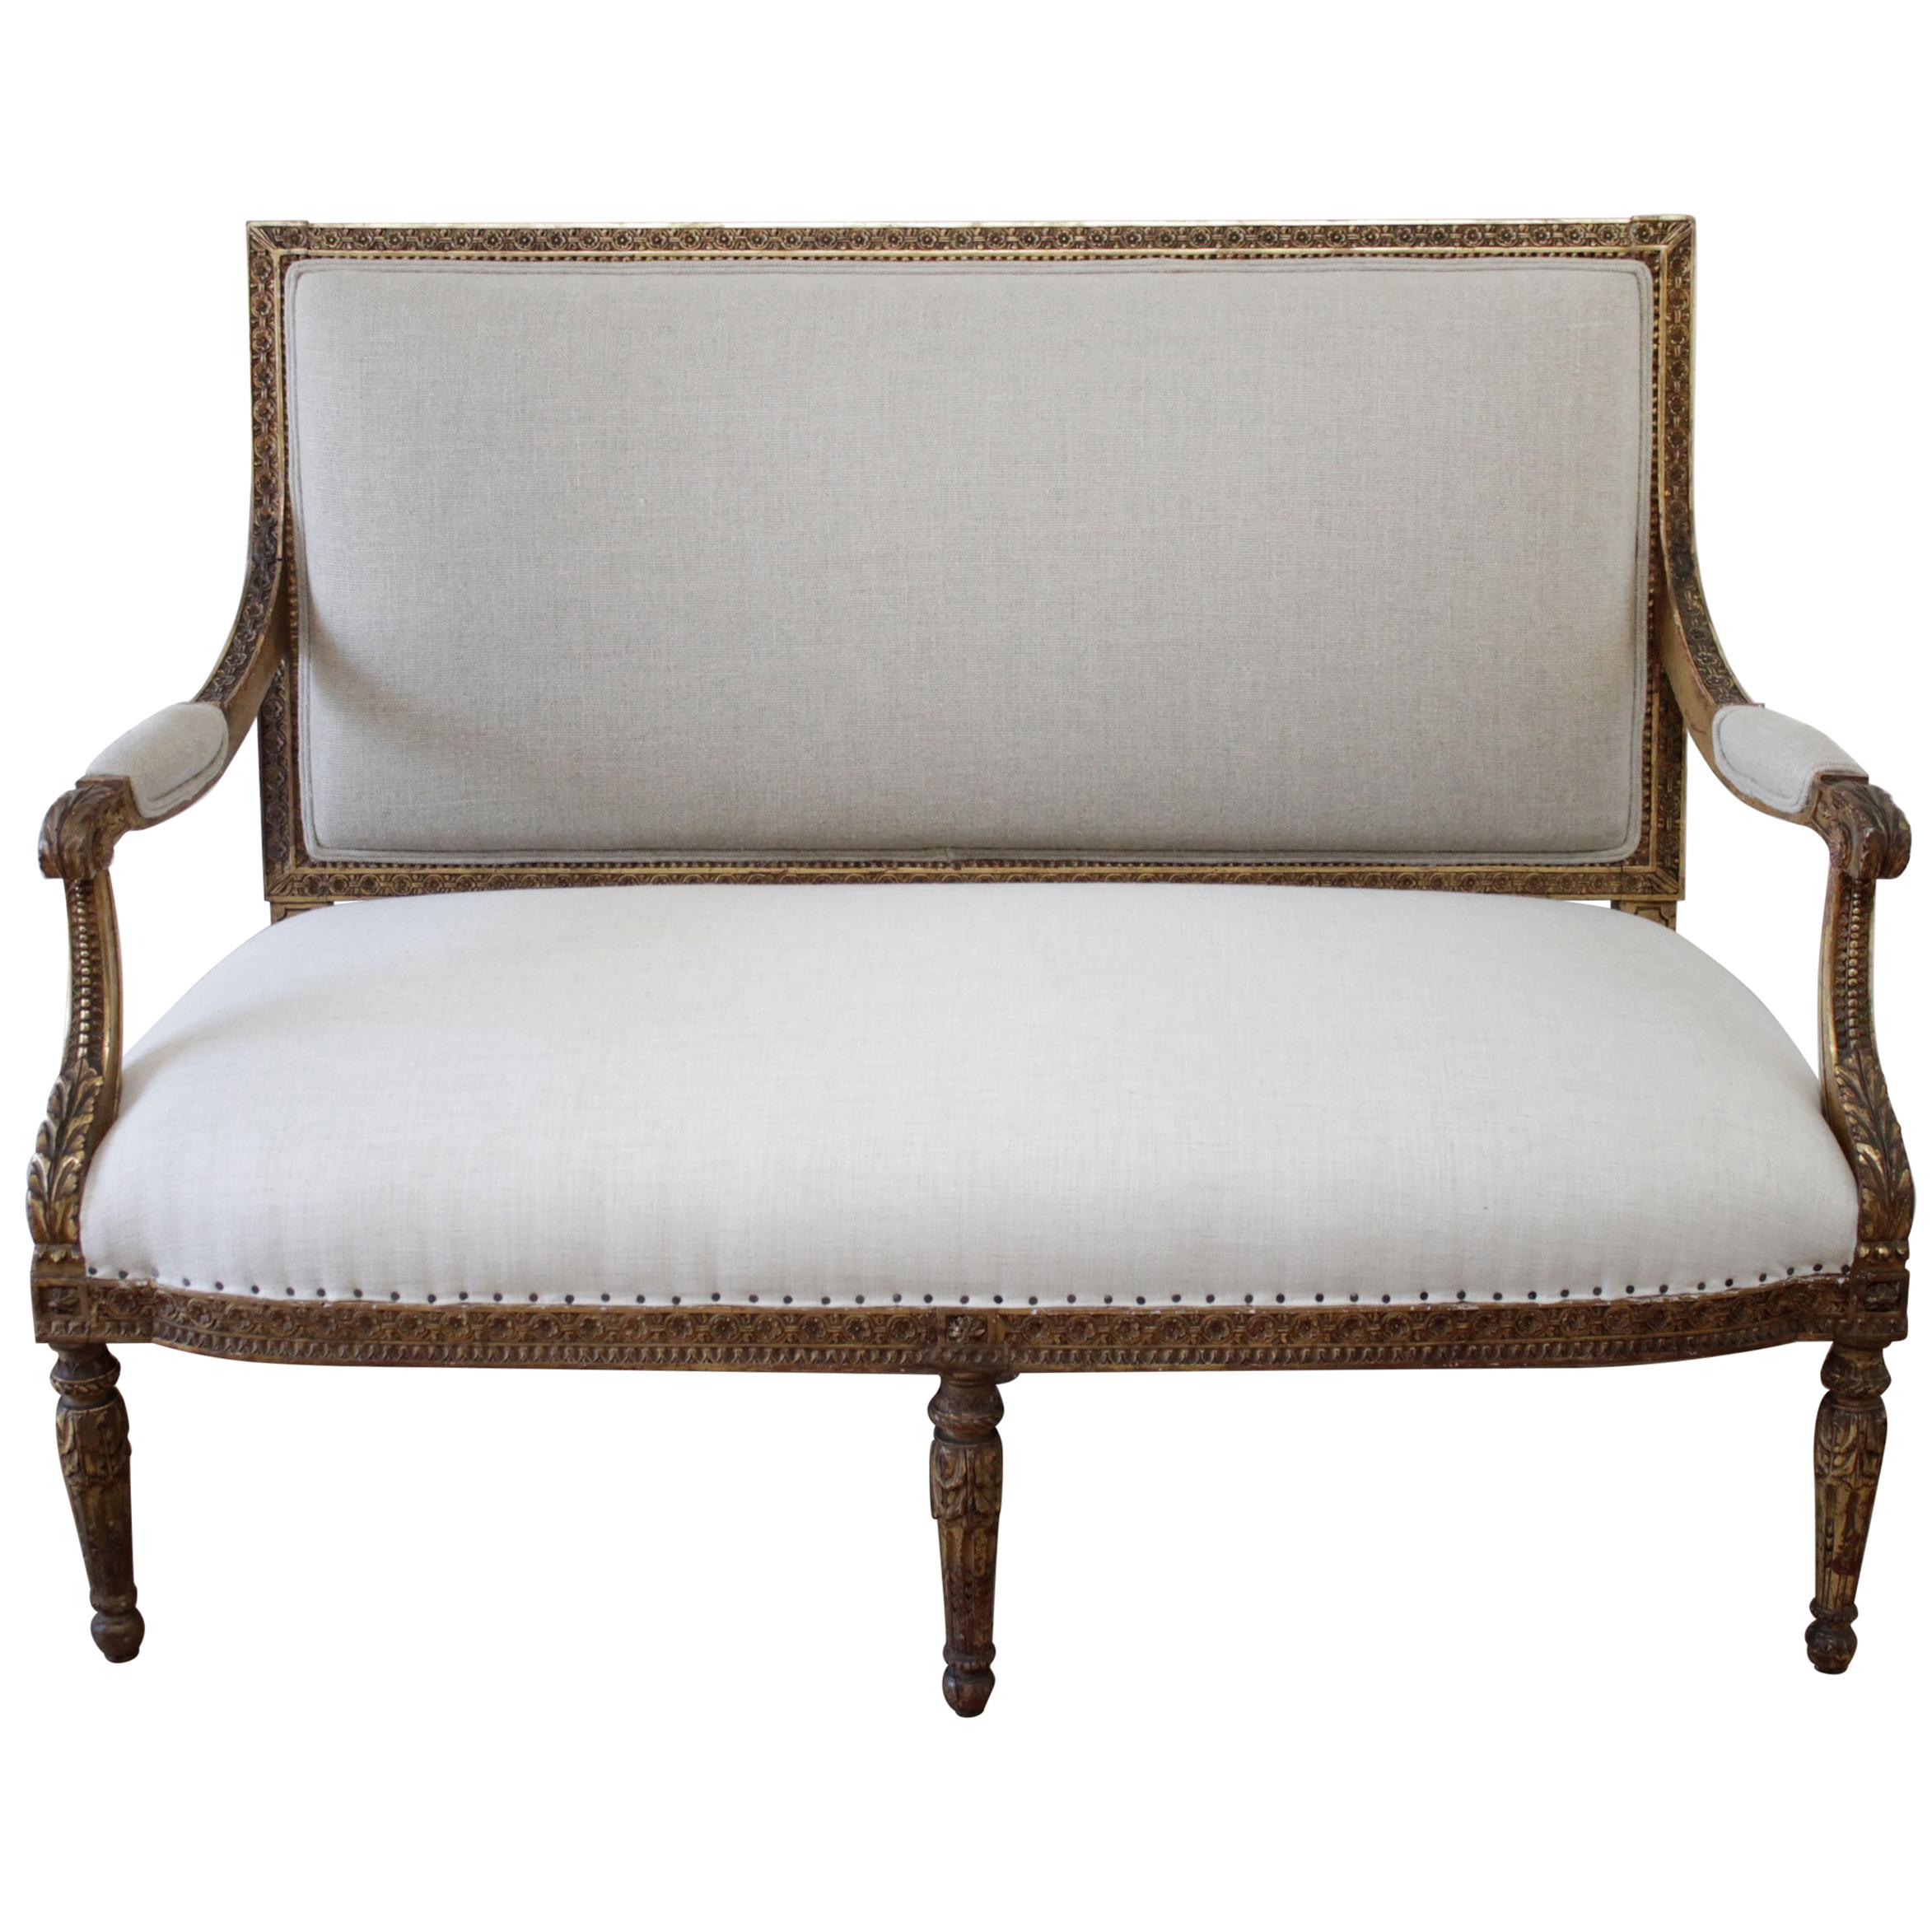 Antique Louis XVI Style Giltwood Settee in Linen